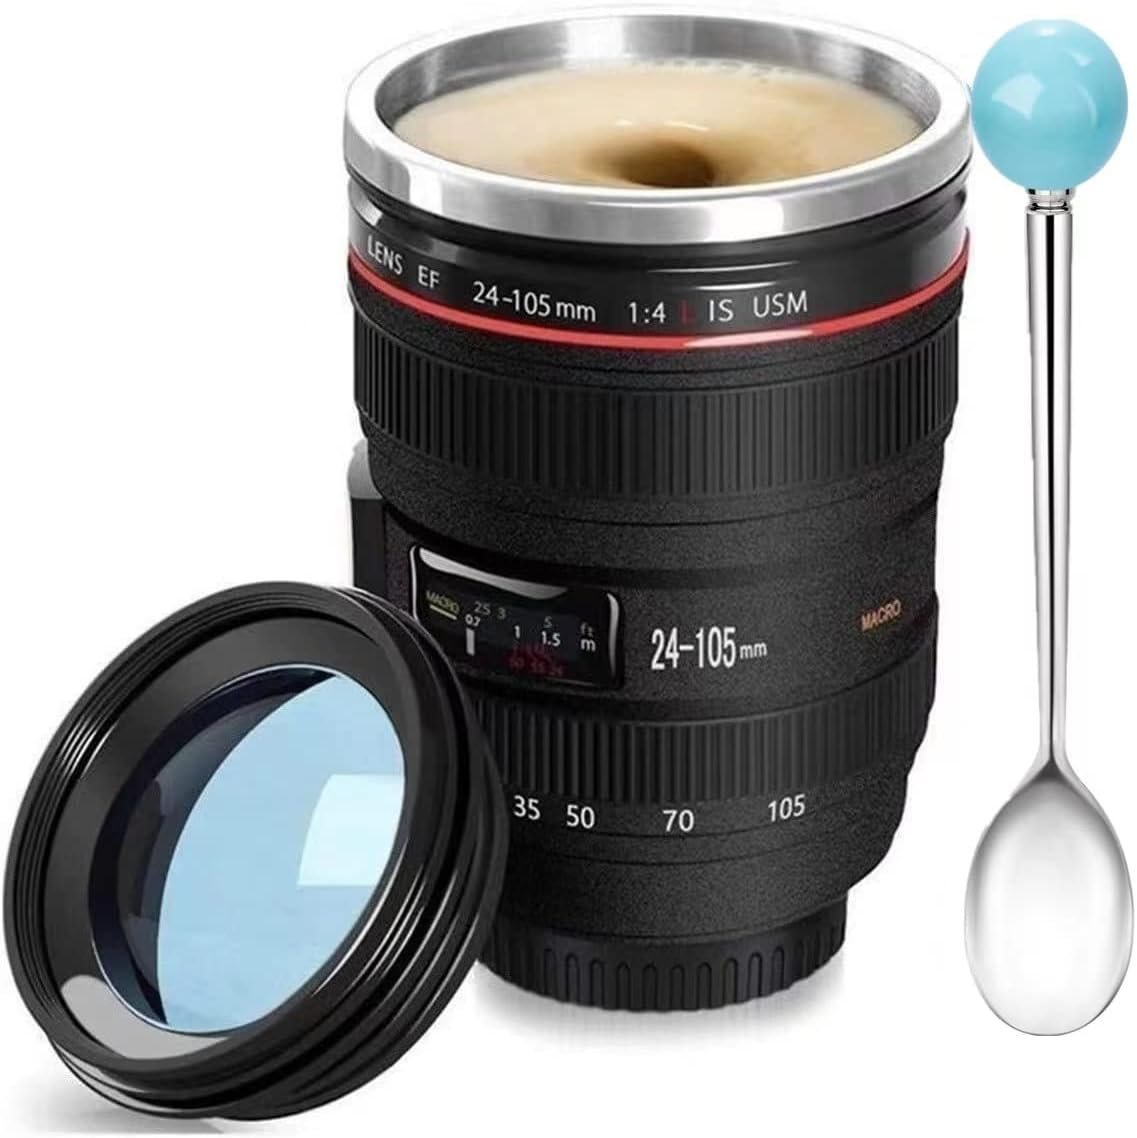 chasing y camera lens coffee mug fun photo stainless steel lens mug thermos great gifts for photographershome suppliesfr